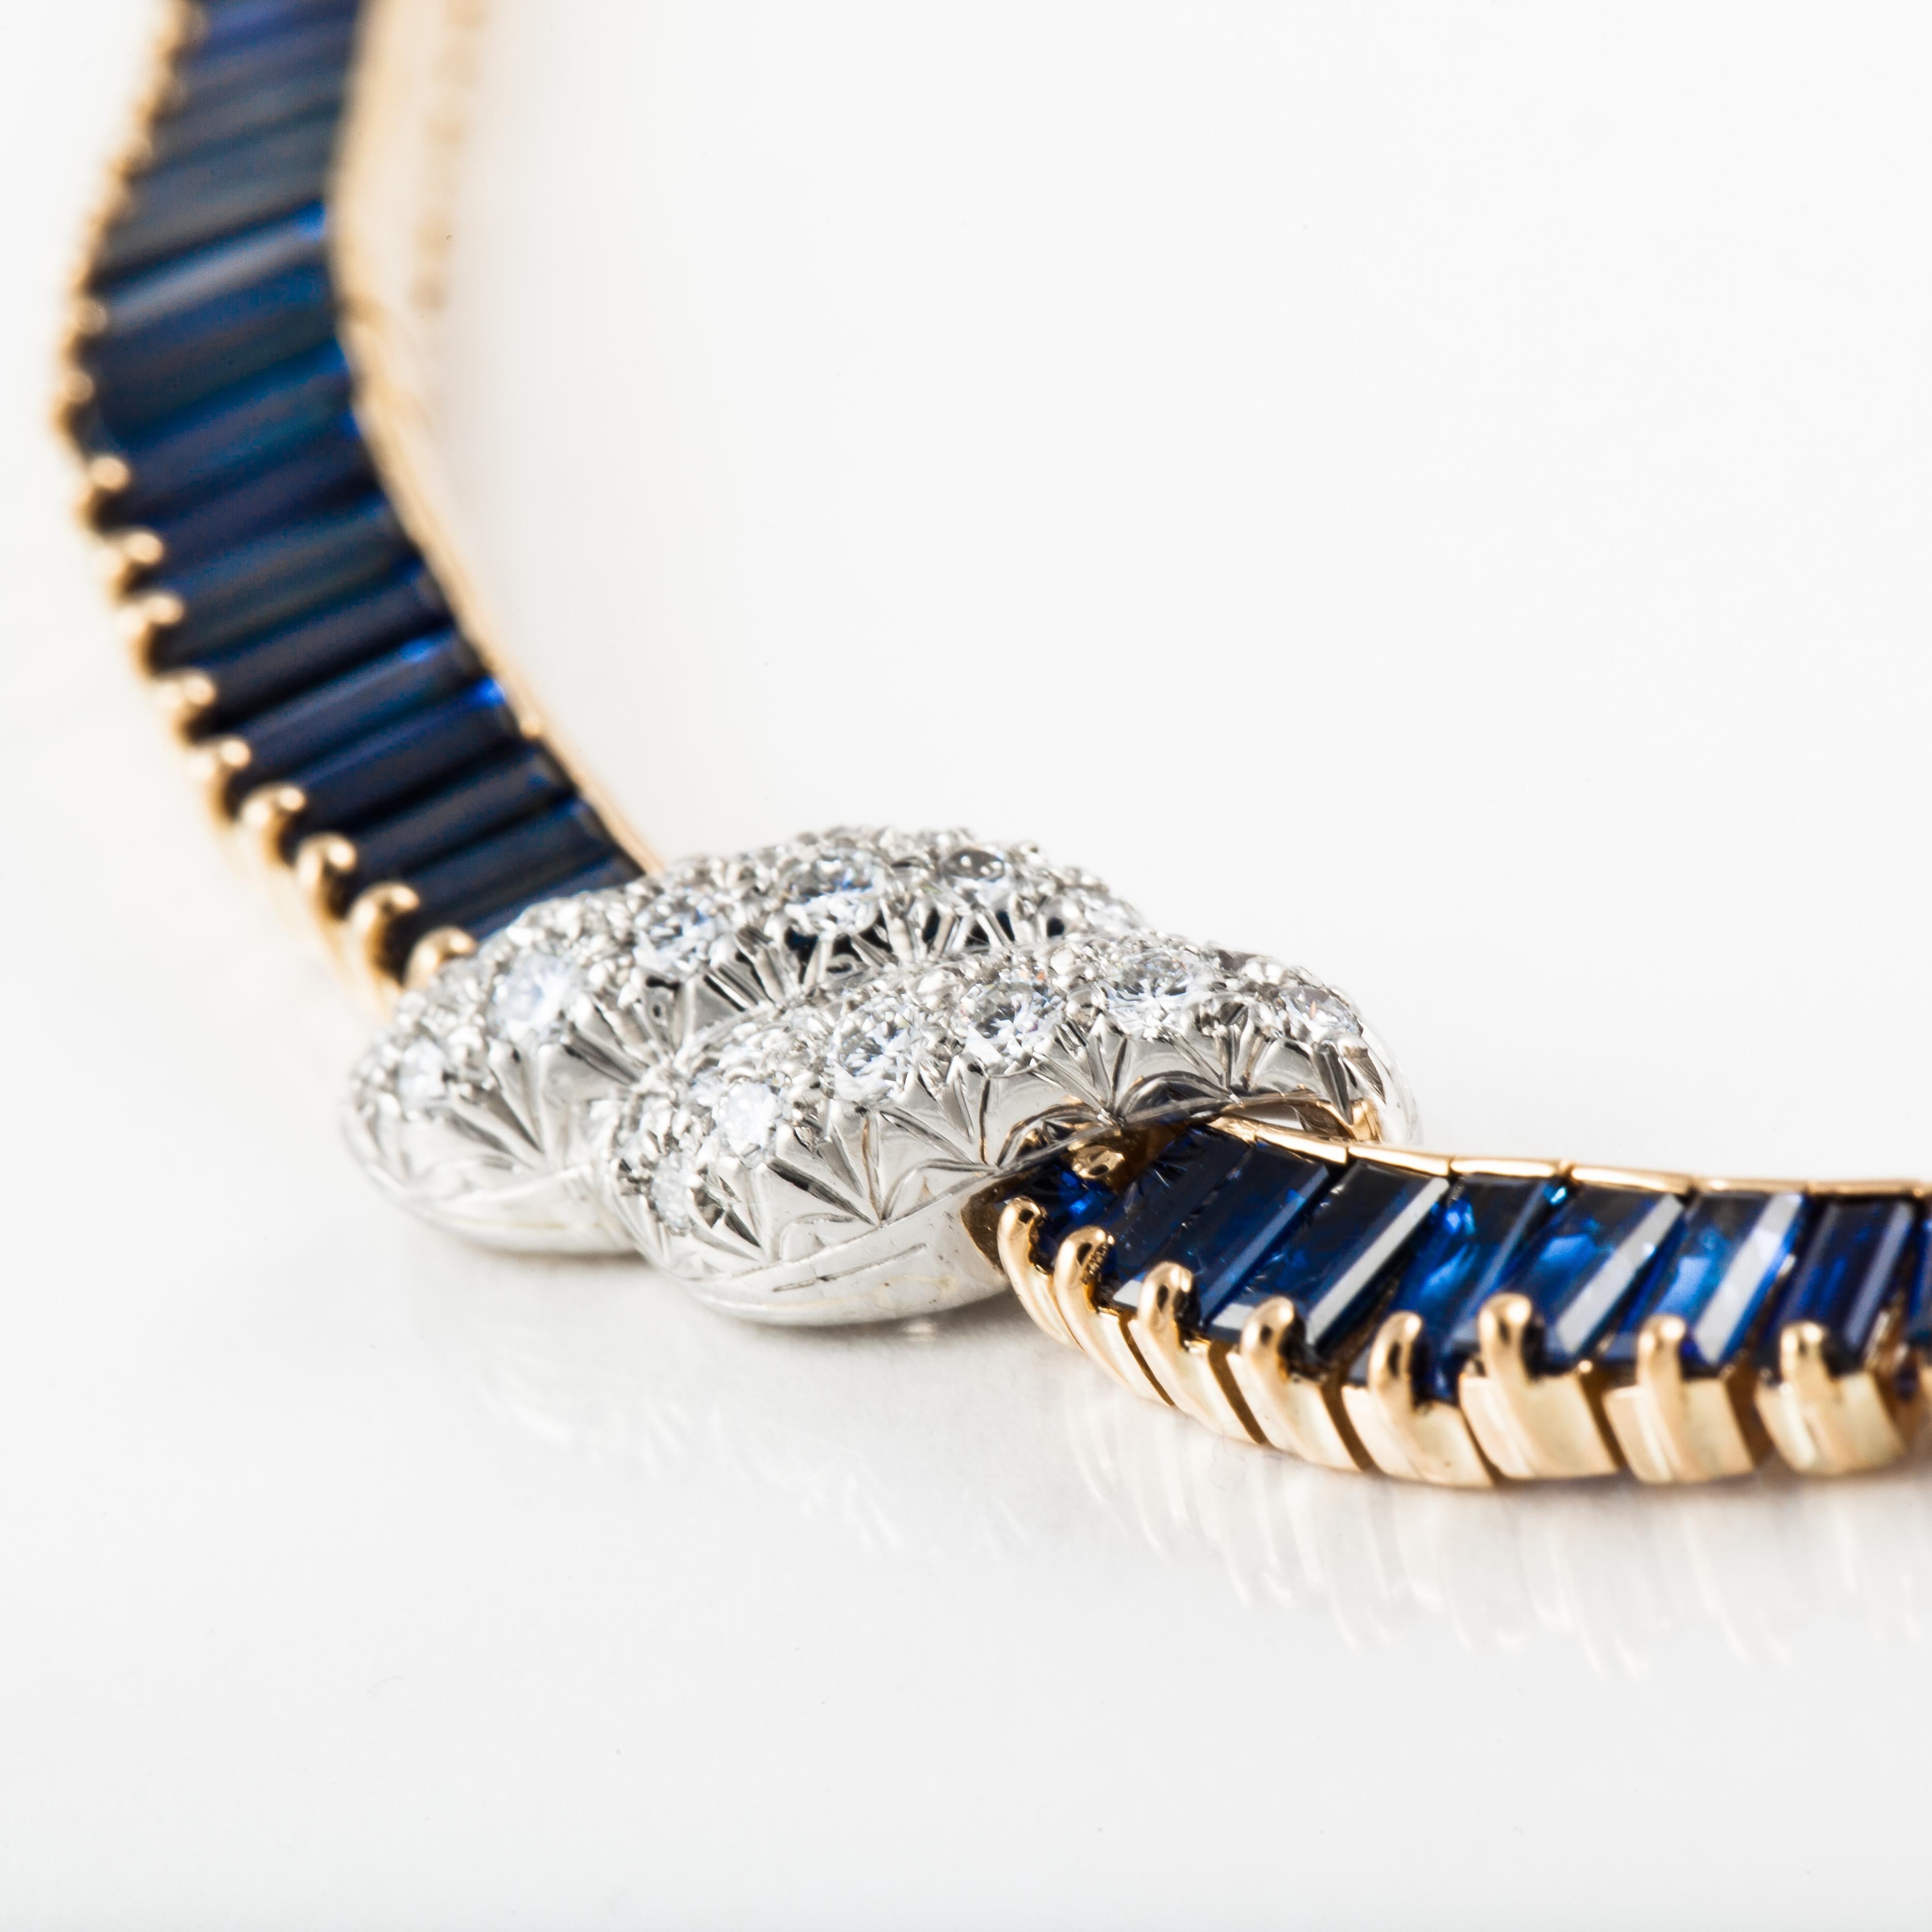 Mixed Cut Oscar Heyman Sapphire and Diamond Necklace in 18K Gold with Platinum